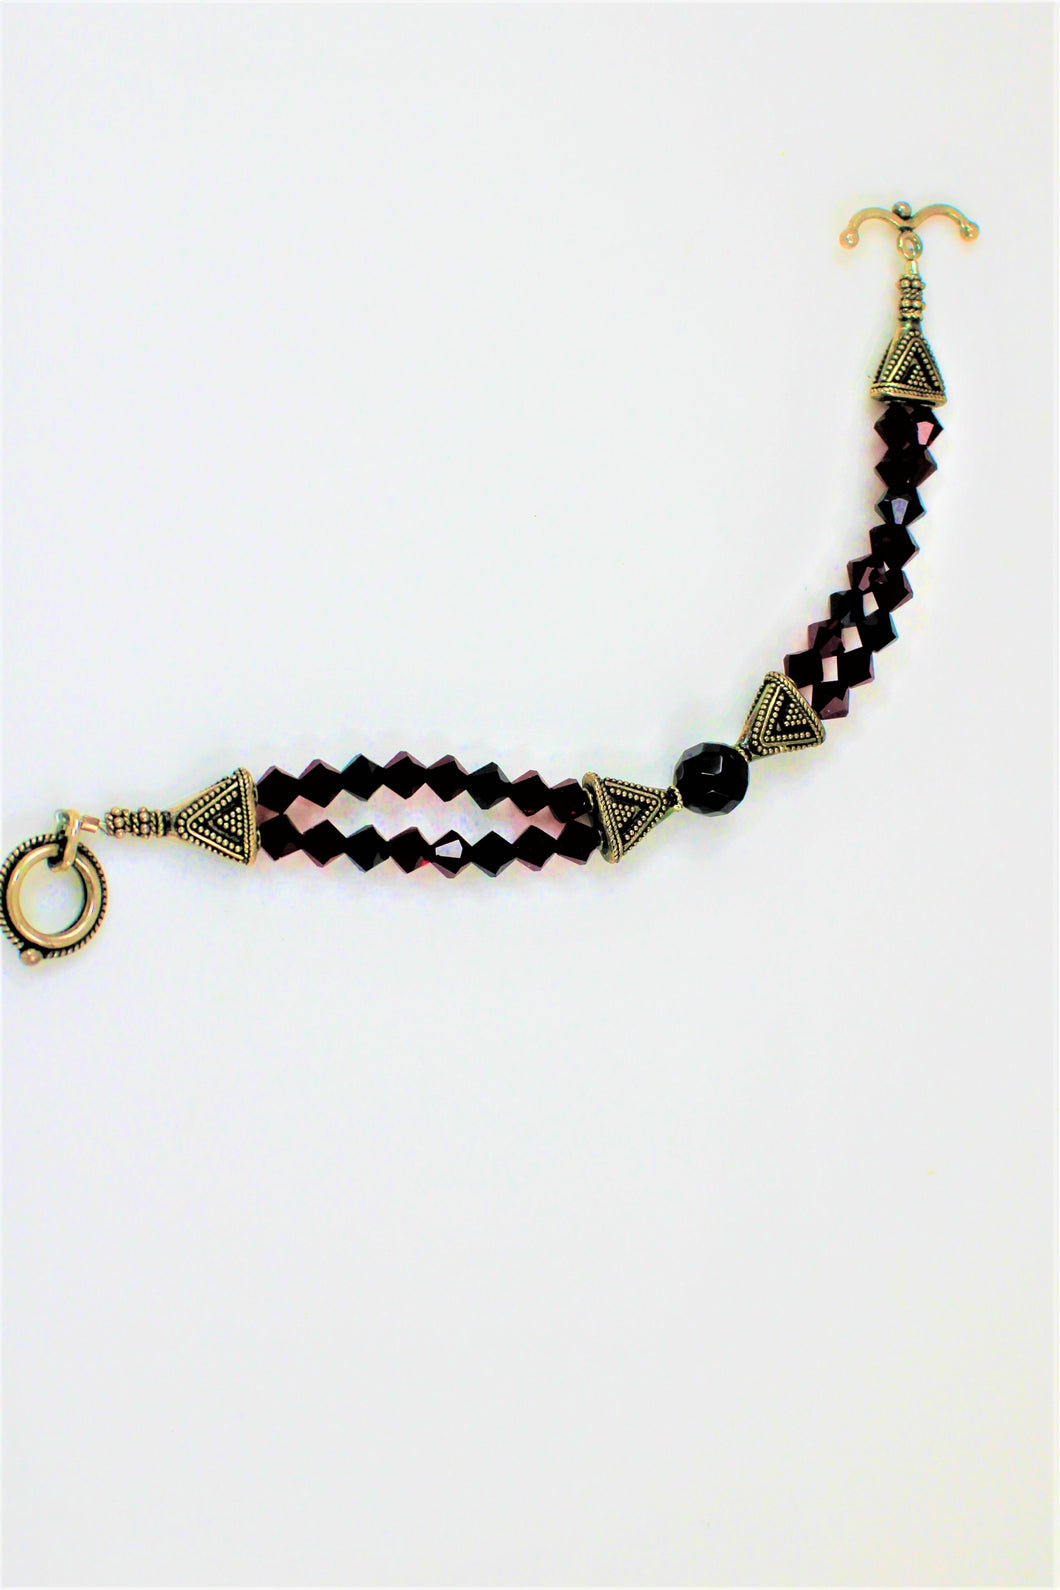 Onyx and Antique Silver Bracelet